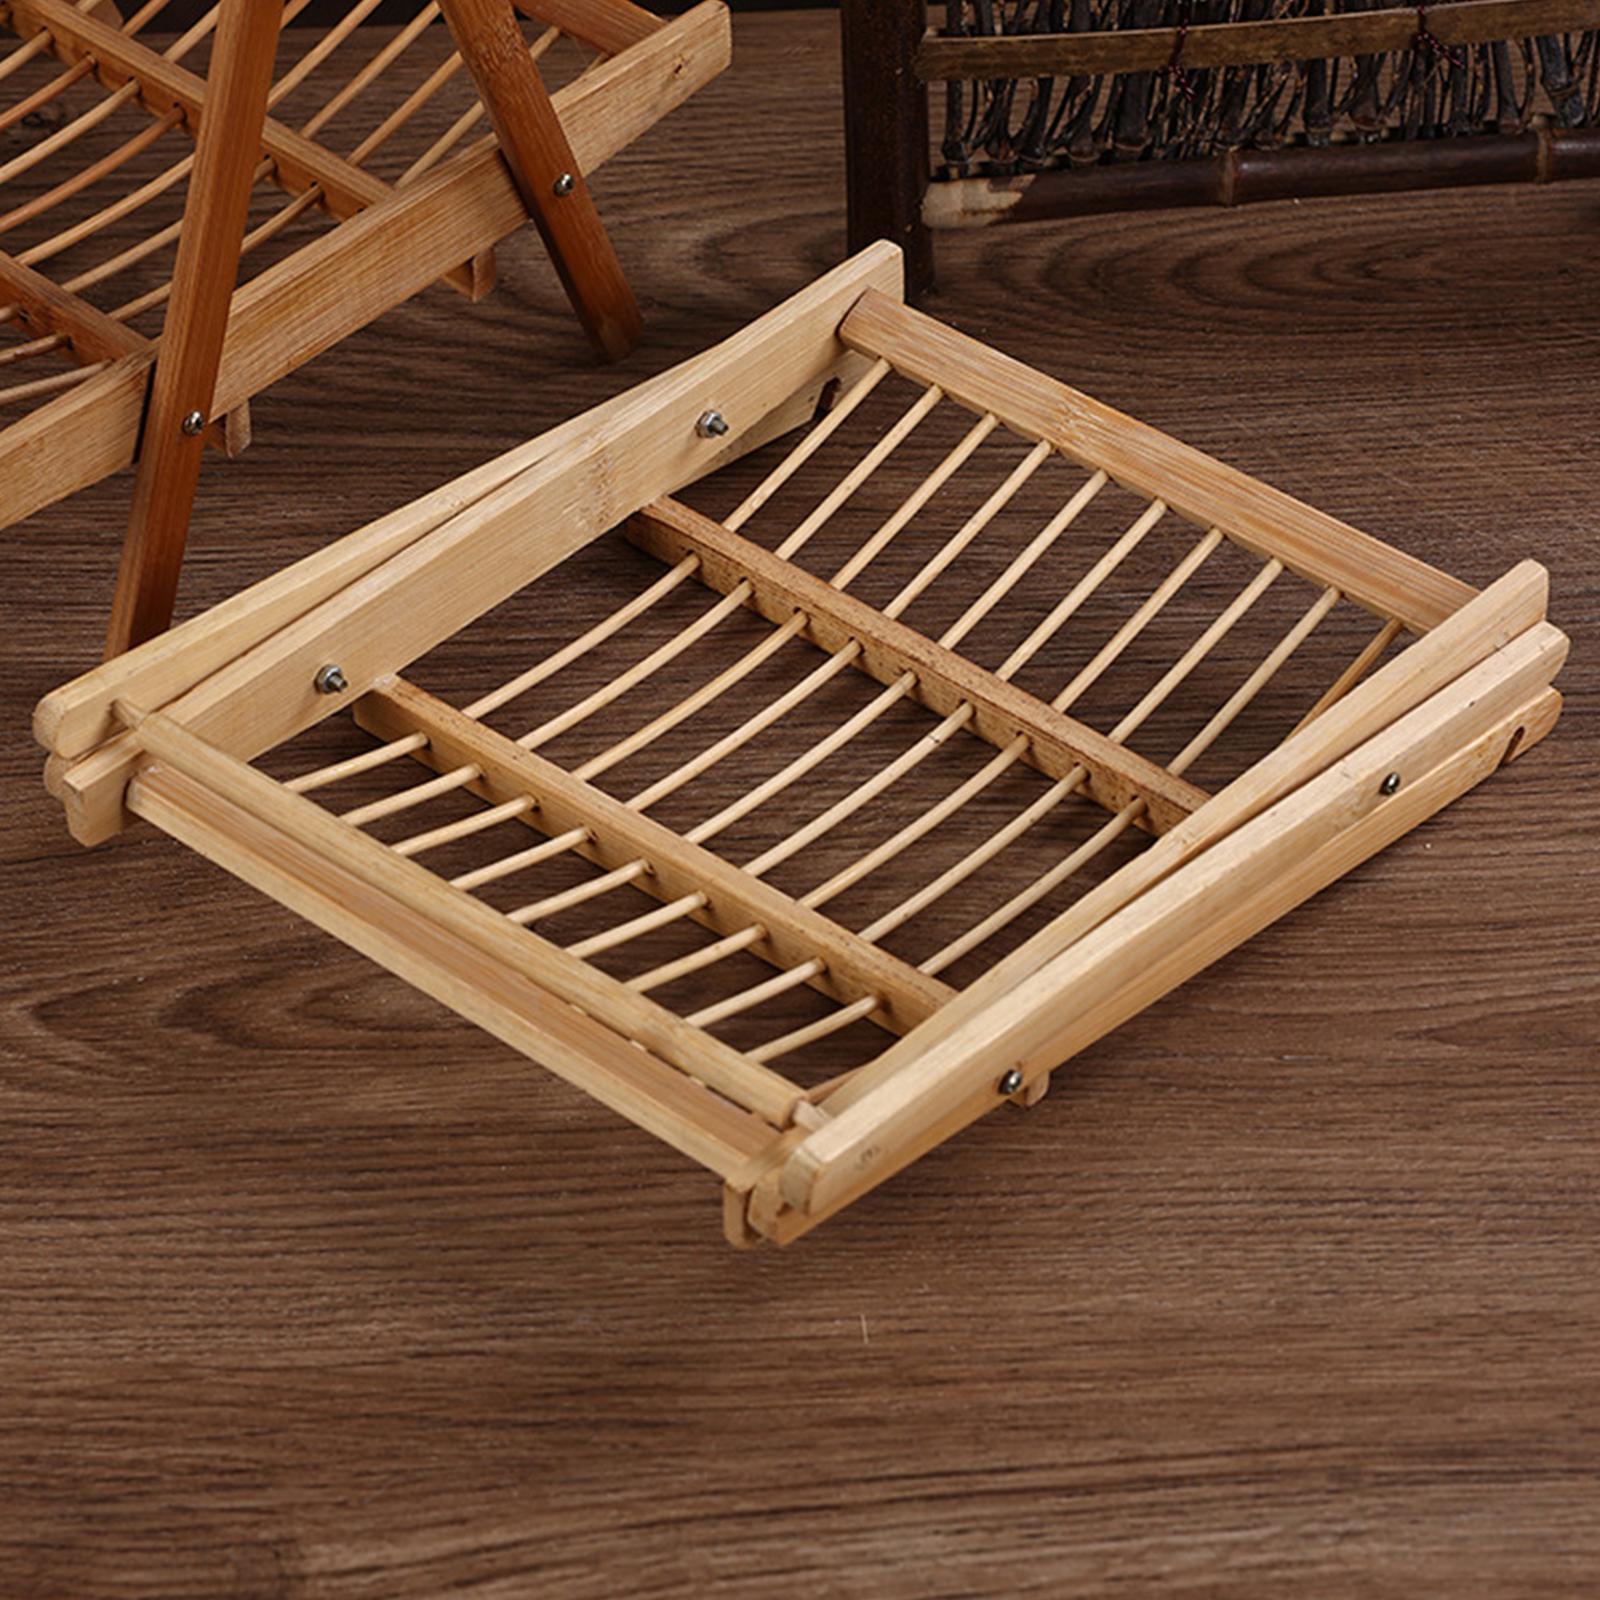 Bamboo Fruit Basket Foldable Rack Multifunctional Bread Fruit Storage Organizer Vegetable Rack for Guest Room Countertop Office Sushi Mutton